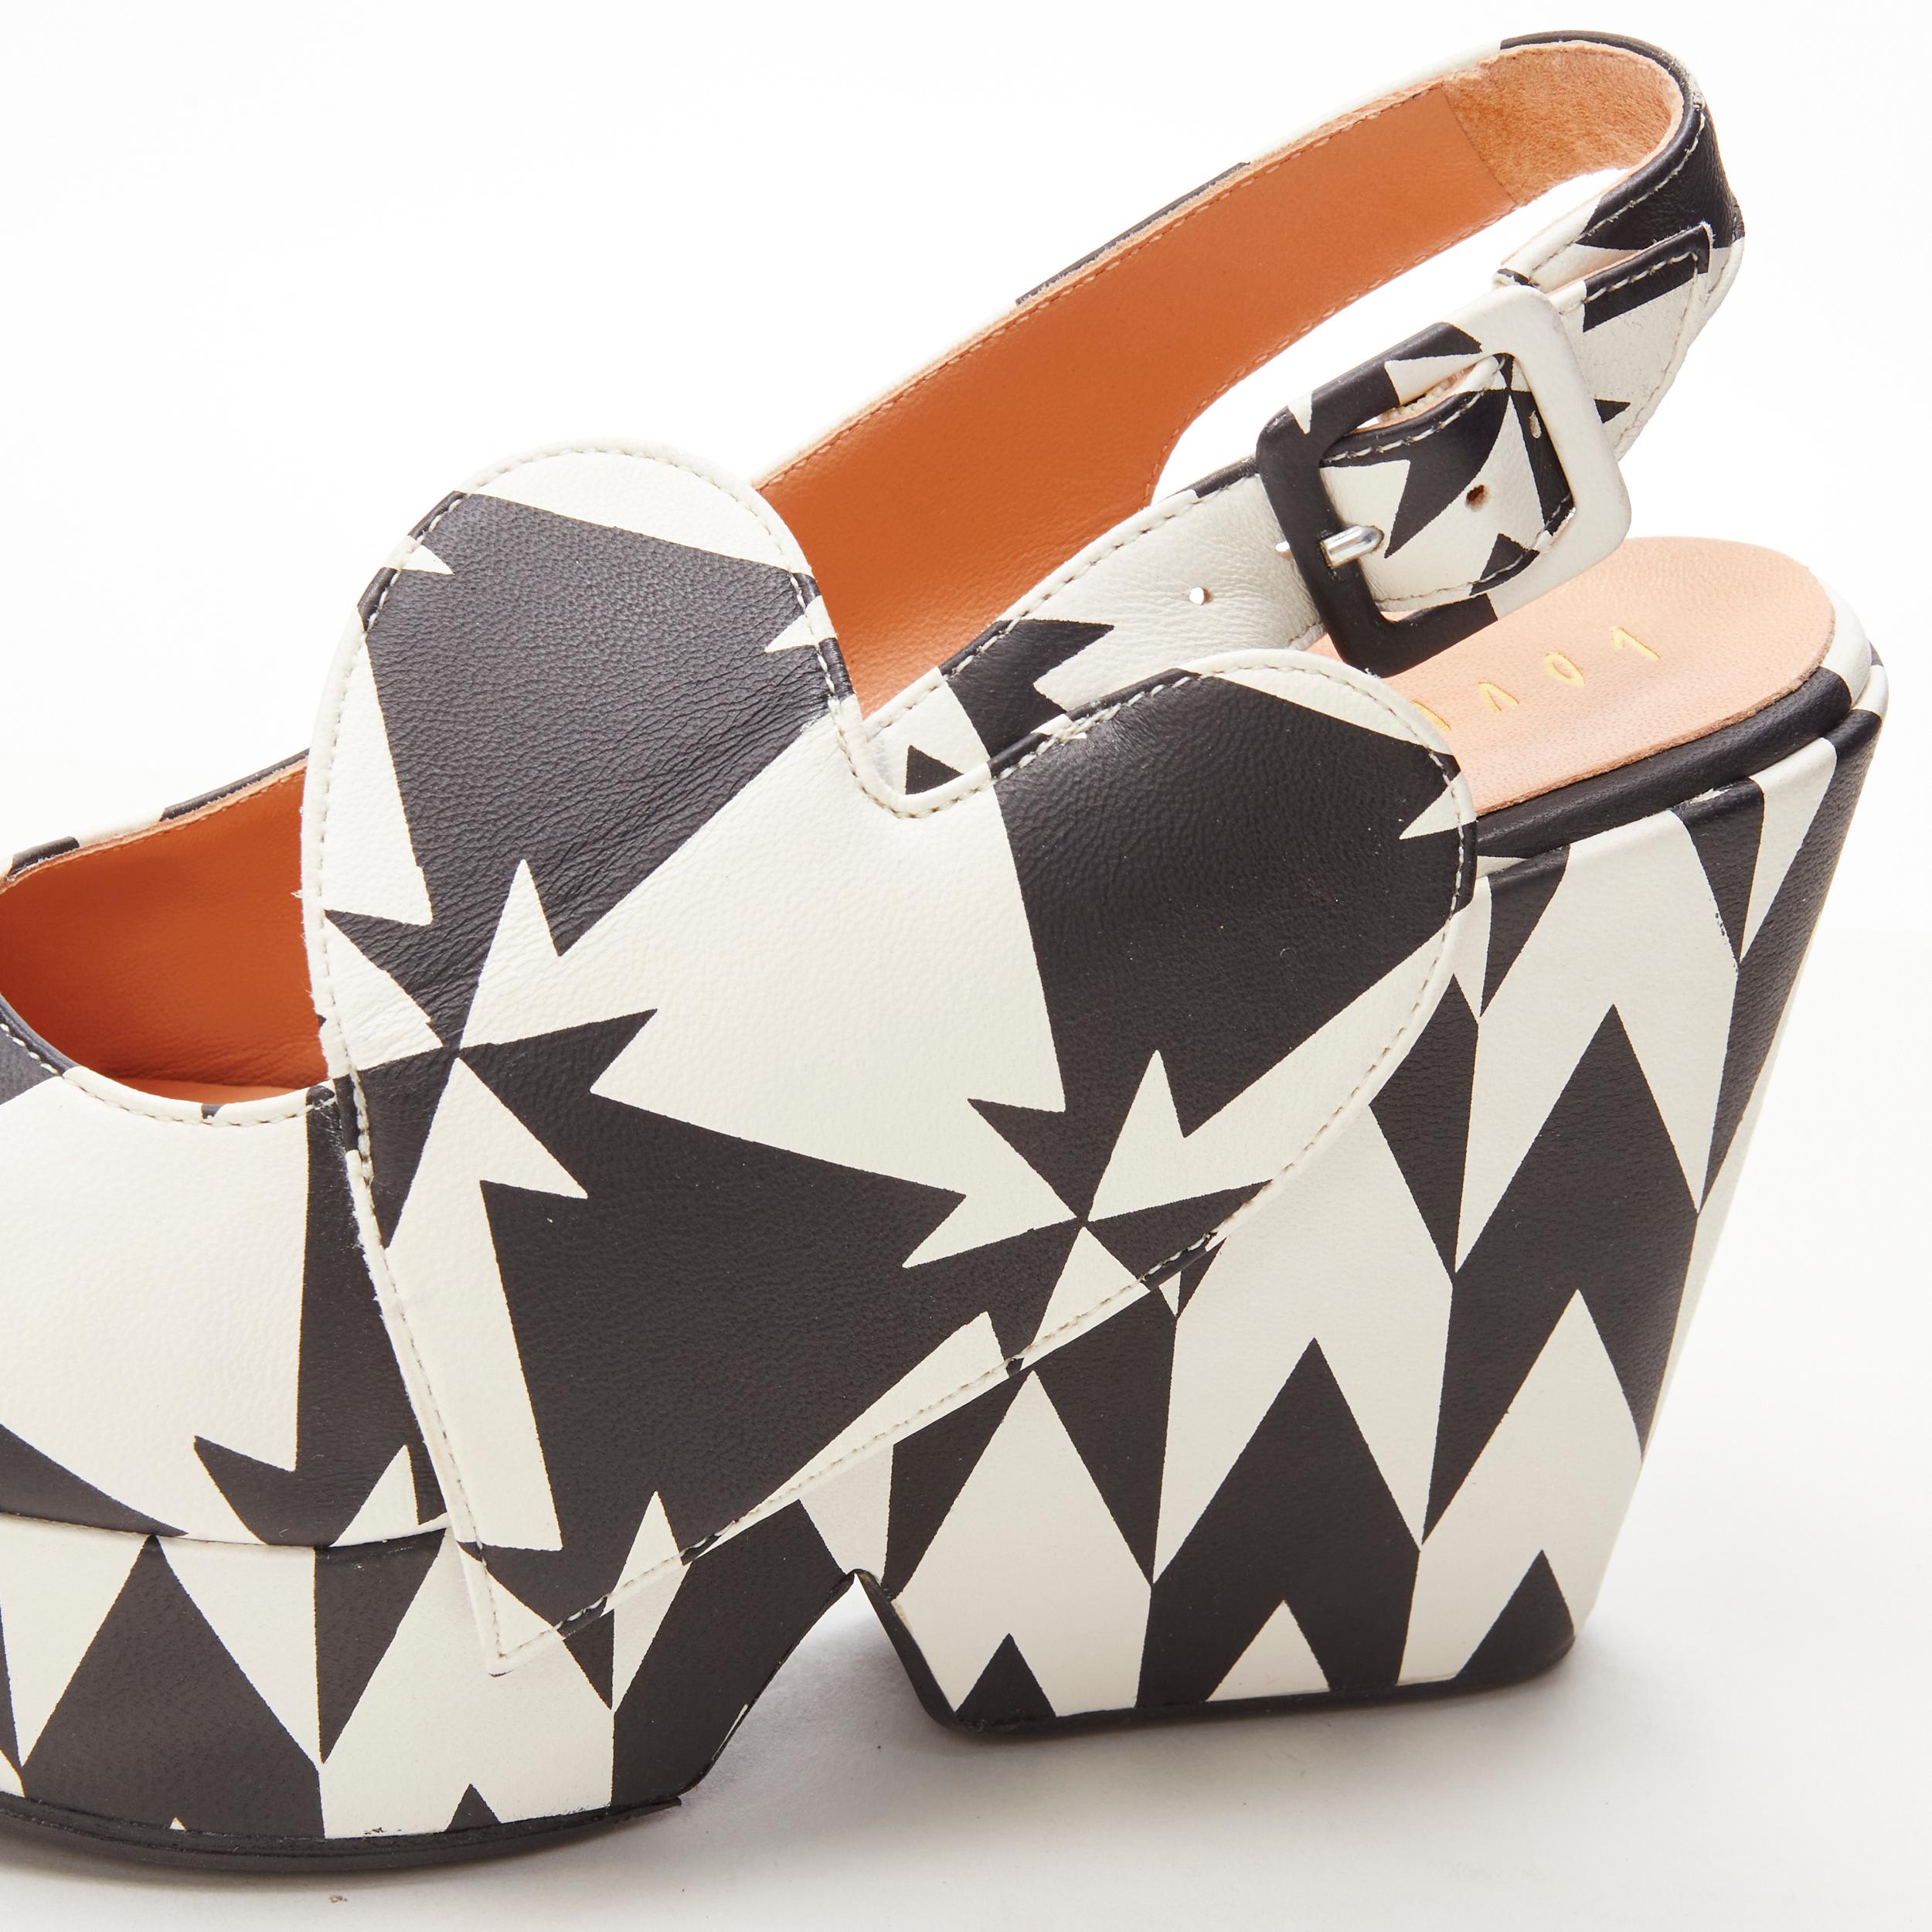 ROBERT CLERGERIE Louise Gray 2013 black white AGN graphic wedge heels EU37 4